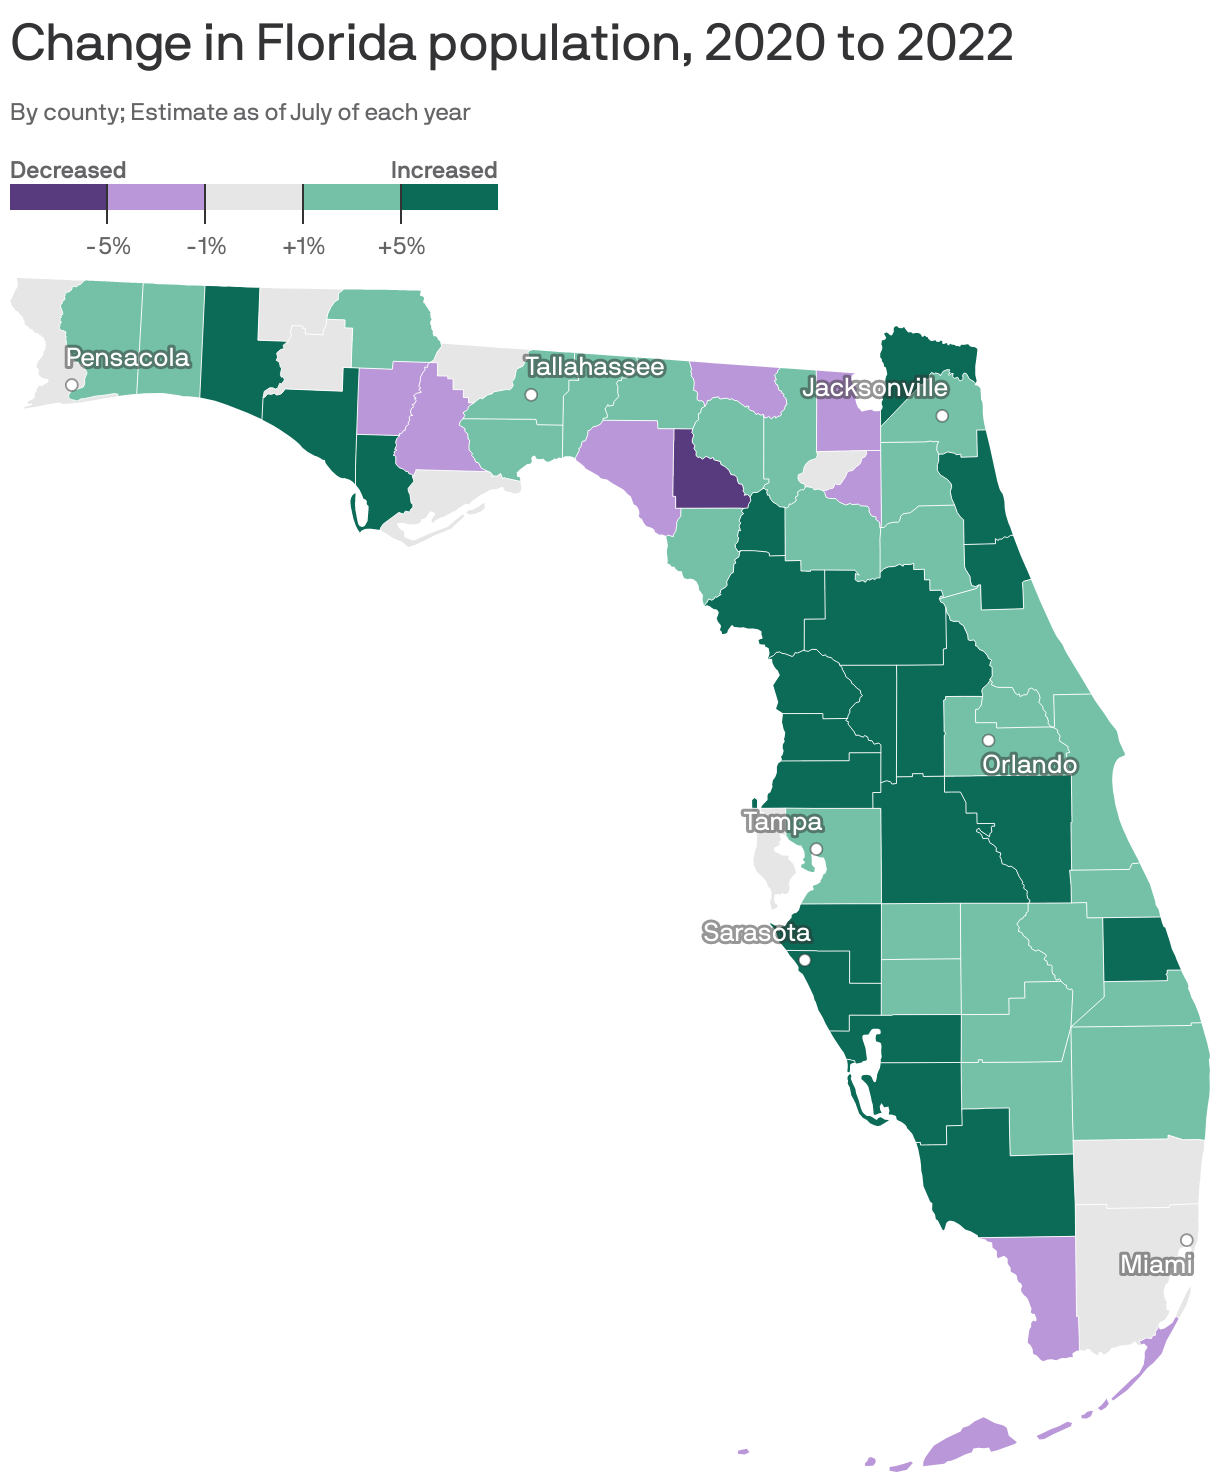 Change in Florida population, 2020 to 2022